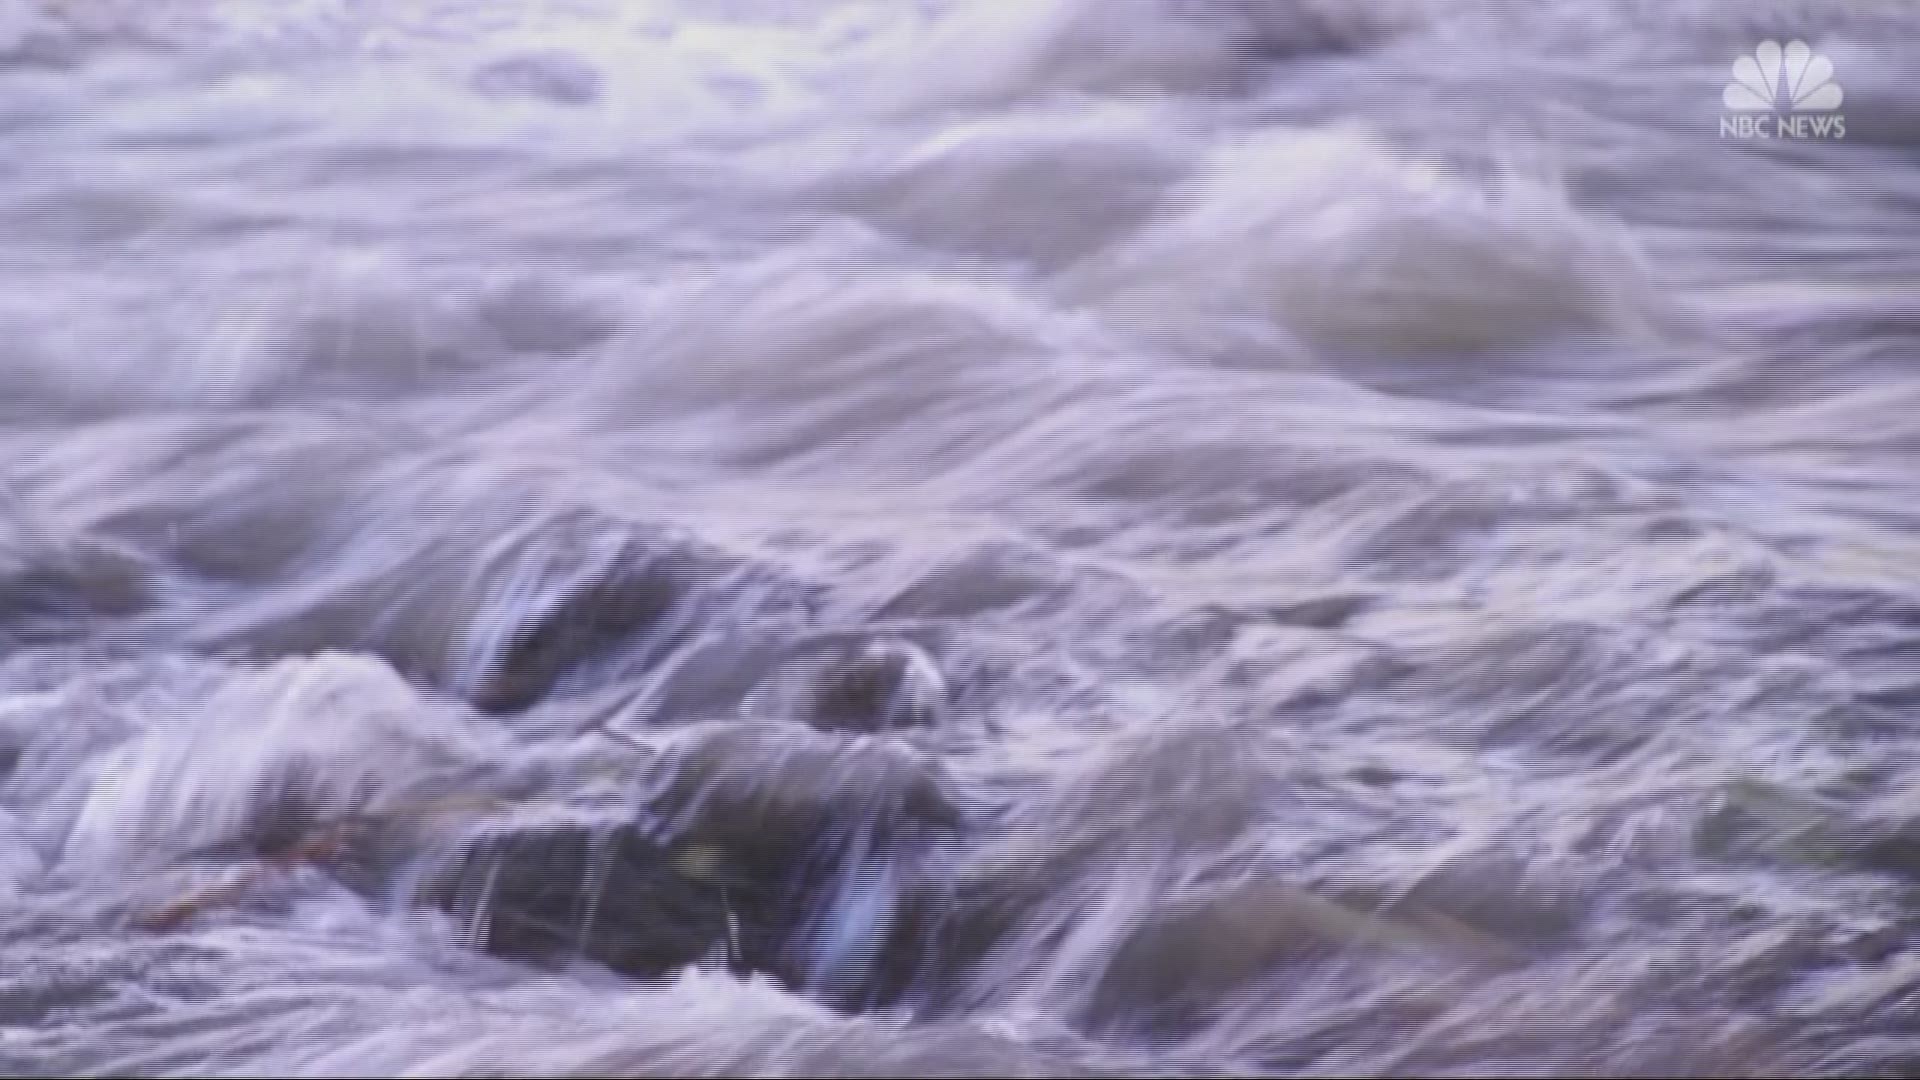 Arizona residents work to save desert river that is a critical water supply to millions.